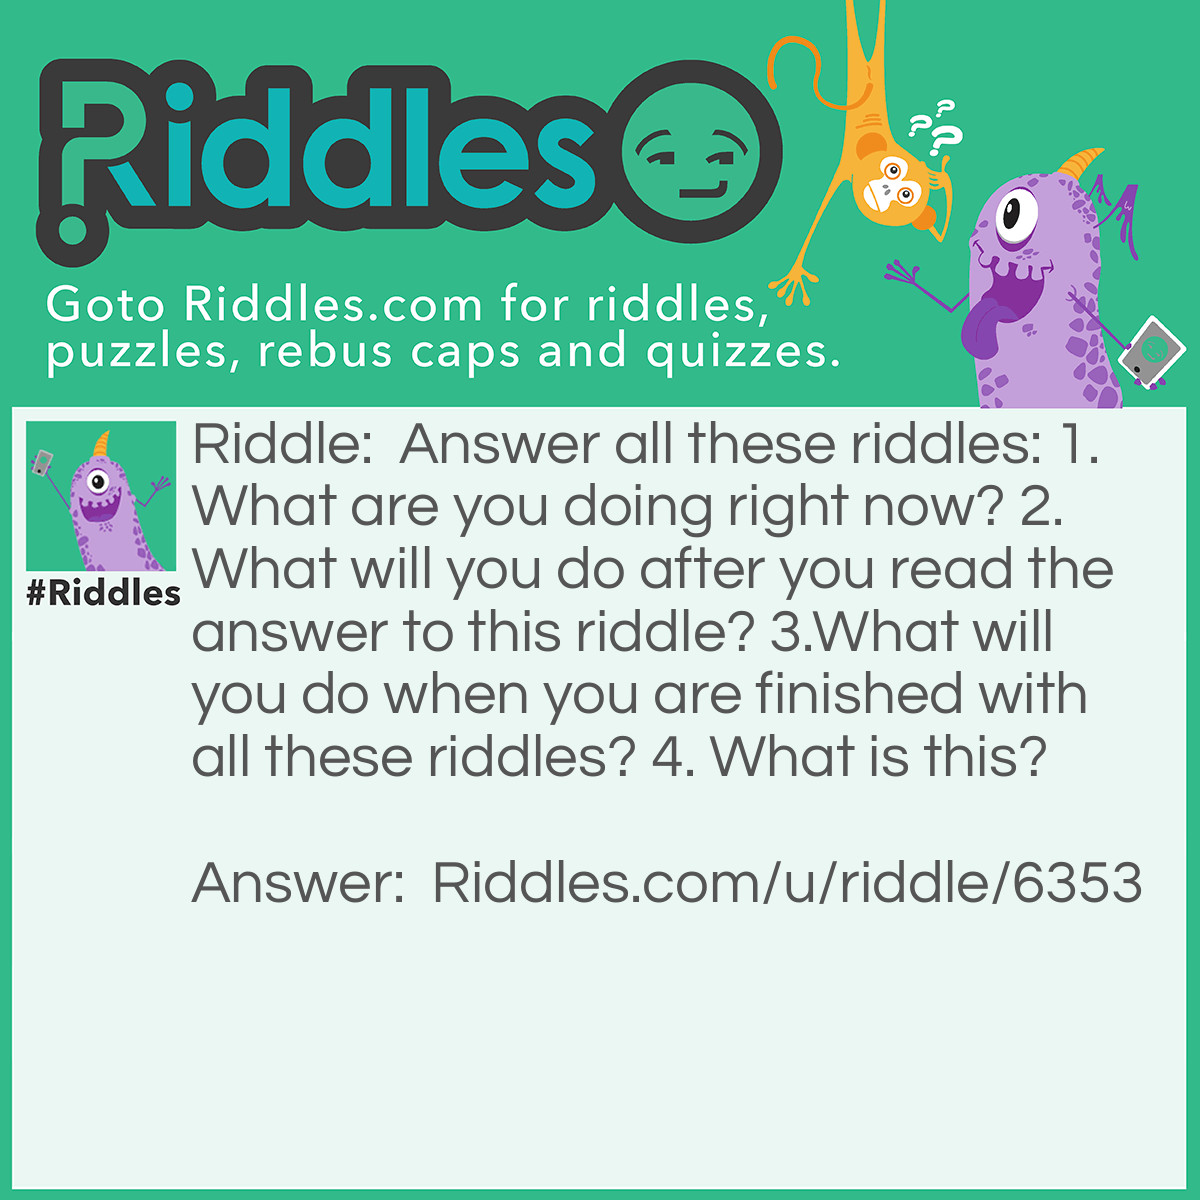 Riddle: Answer all these riddles: 1. What are you doing right now? 2. What will you do after you read the answer to this riddle? 3.What will you do when you are finished with all these riddles? 4. What is this? Answer: 1. You are currently reading the answers. 2. You will move on to the next riddle. 3. You will move on to the next riddle. 4. This is a riddle.